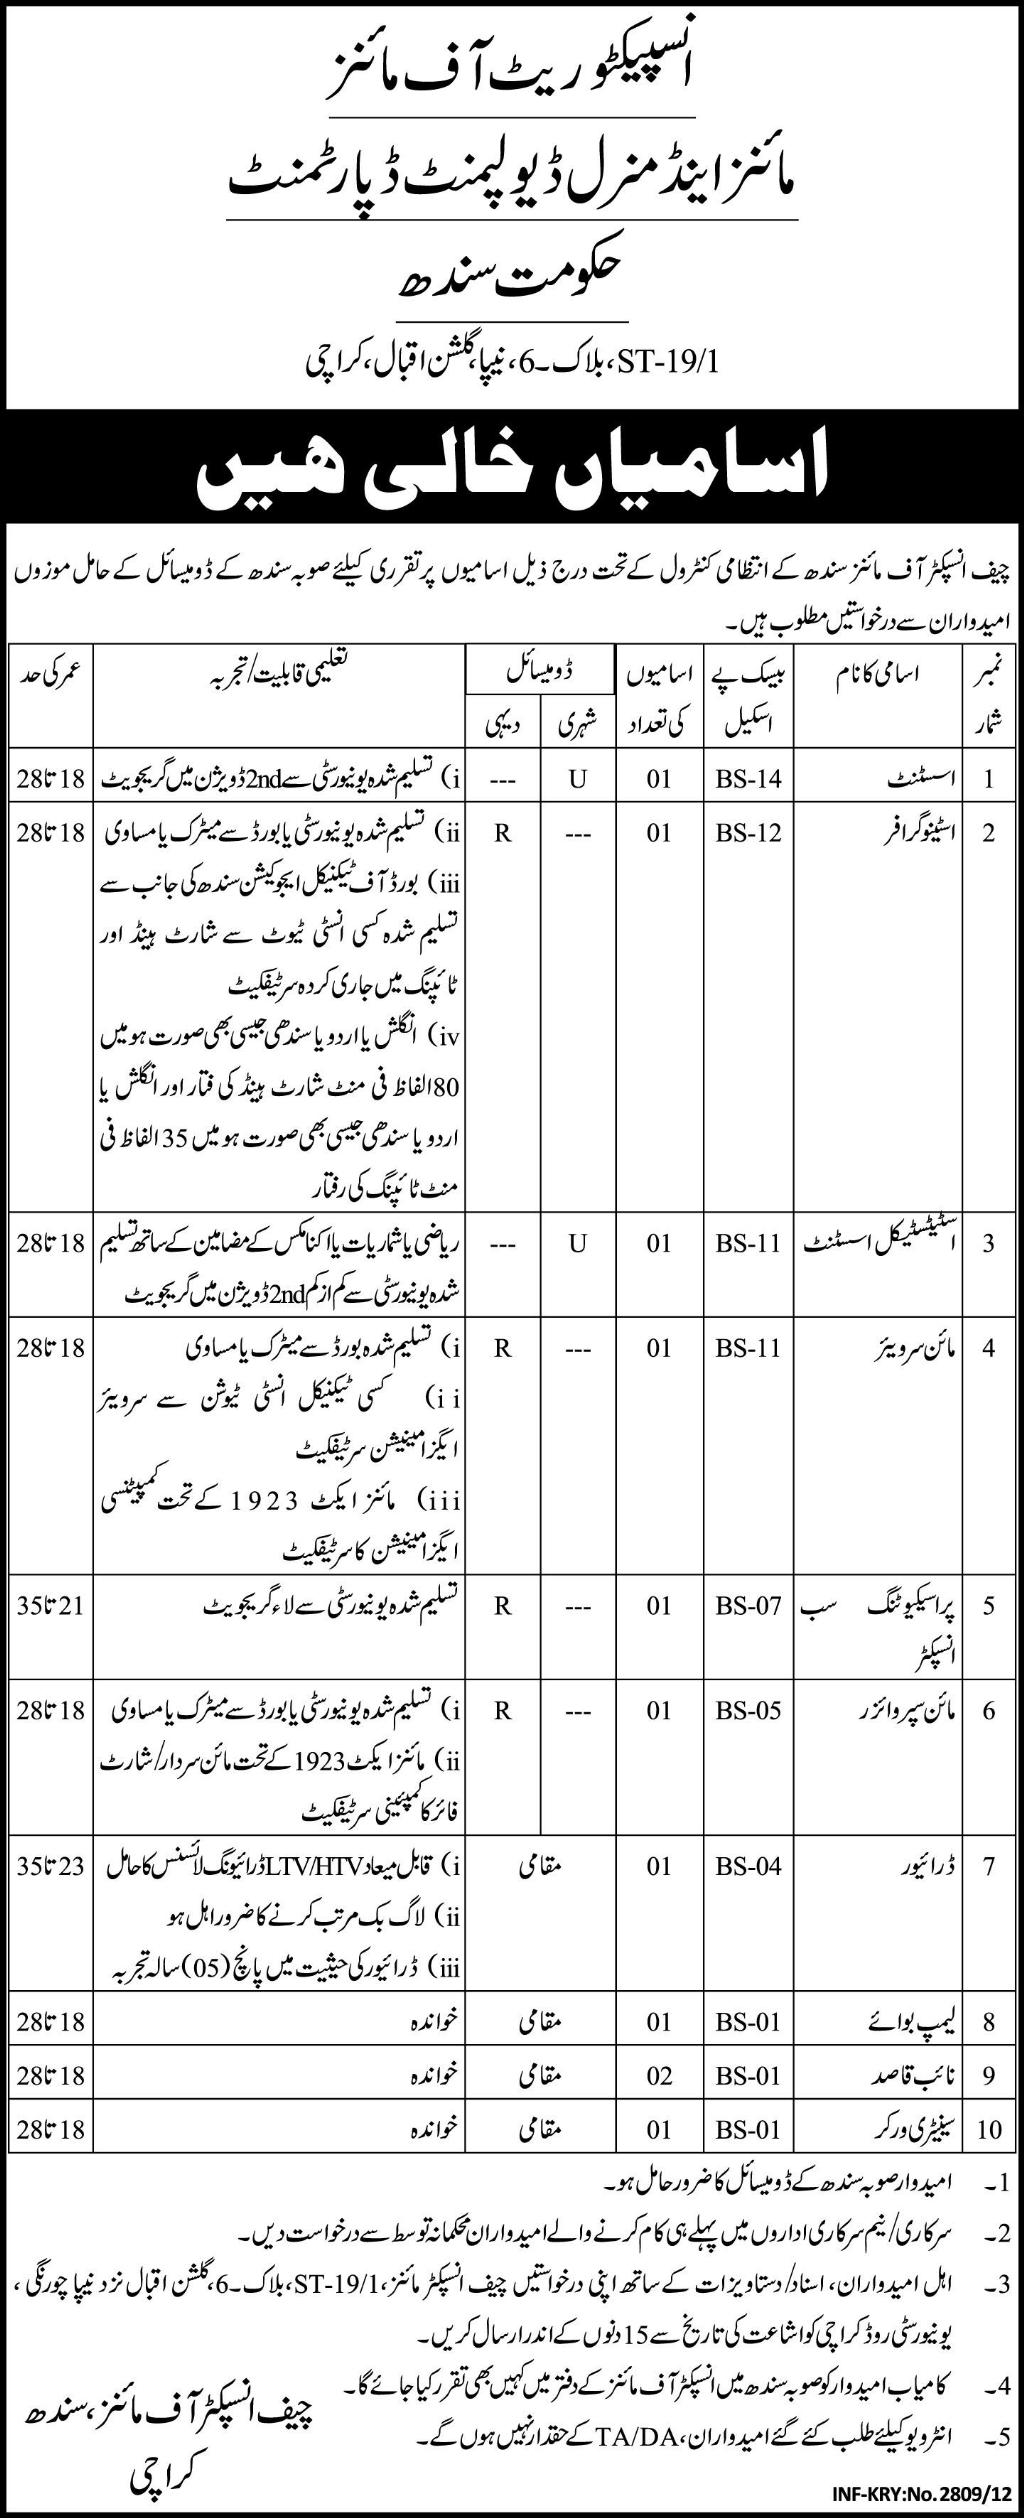 Mines and Minerals Development Department (Govt. of Sindh) Requires Admin and Technical Staff (Govt. job)